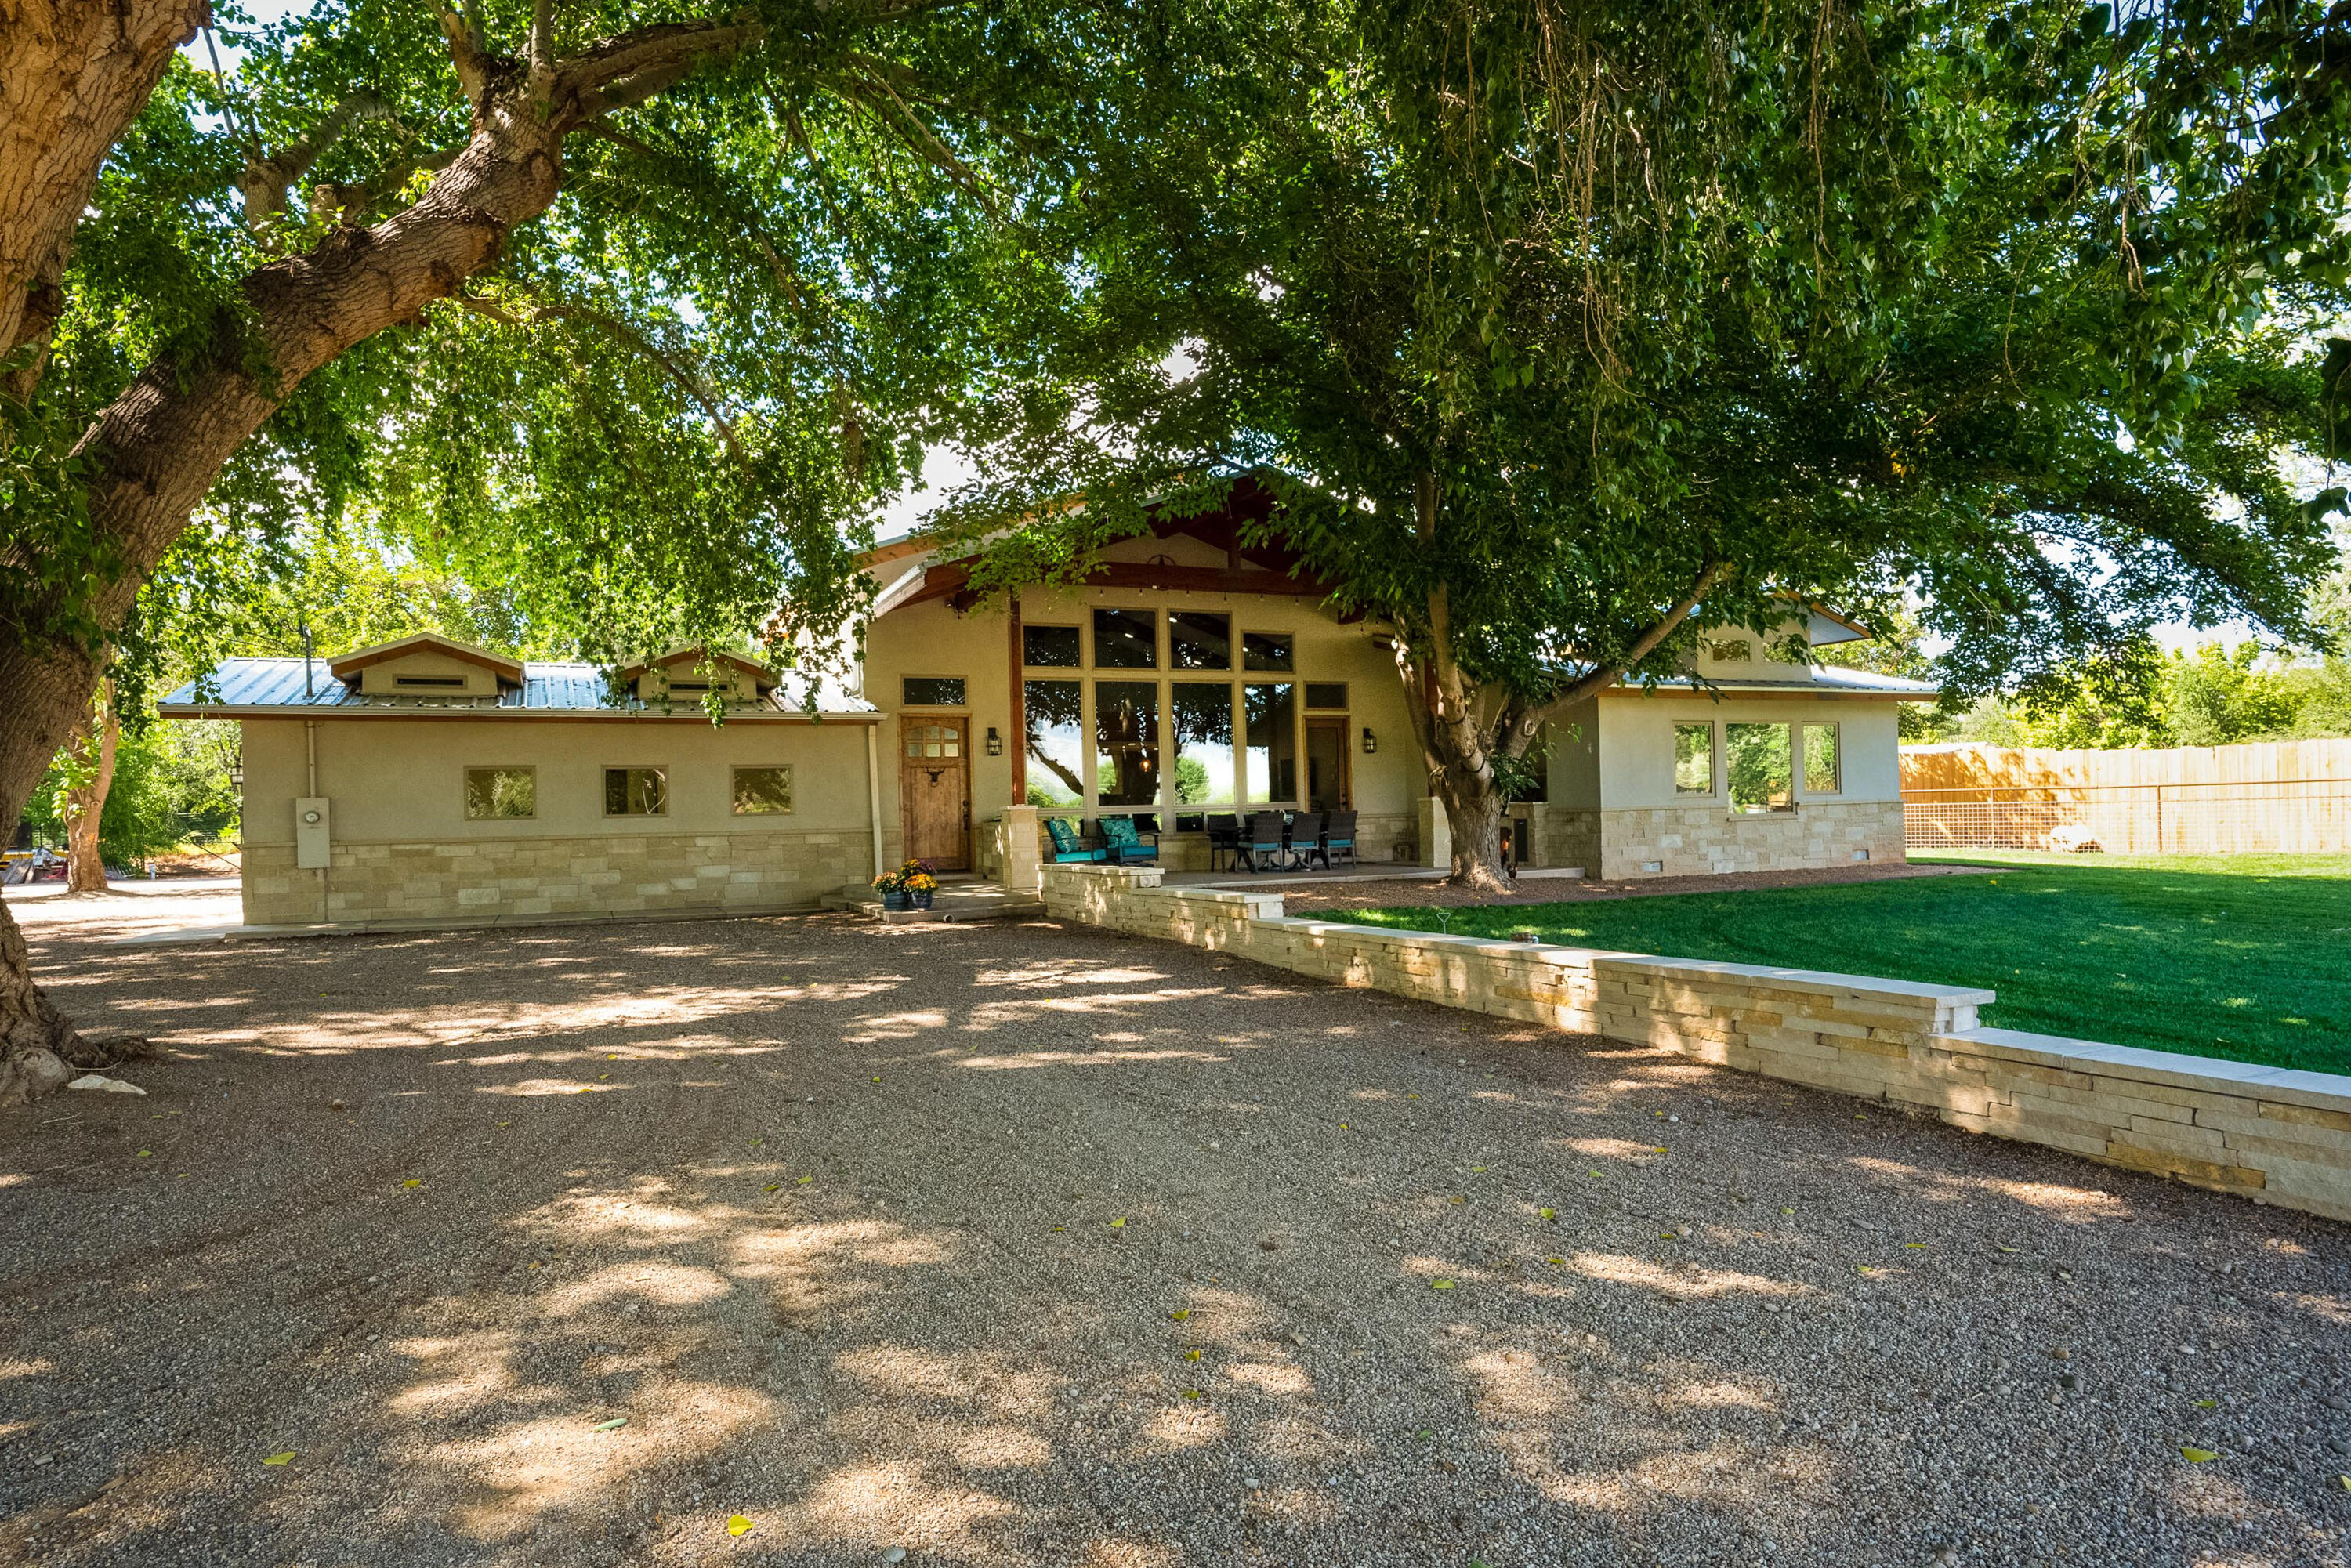 Completely renovated in 2019, this 3 acre premier Corrales greenbelt  property surrounded by Cottonwoods is special! Walk or ride directly onto ditch path. A stunning new home with a versatile floorplan offers 4 bedrooms, a playroom, office, laundry & mud room. The greatroom/kitchen has panoramic views of the Sandias, Jenn-aire stainless appliances, a barn door pantry, custom cabinetry with granite tops. The Owners Quarters has a breathtaking view of the Sandias and spa like bathroom with marble tops and Travertine floors. An outdoor kitchen graces the front portal while an 1130 s.f. shop with 8' doors and 220 Volt enhances the back. A pipe fence with 6 gage wire and electric gate surrounds the property. There's a complete RV hook up and 3 horse stalls with an alley. Read Special Features!